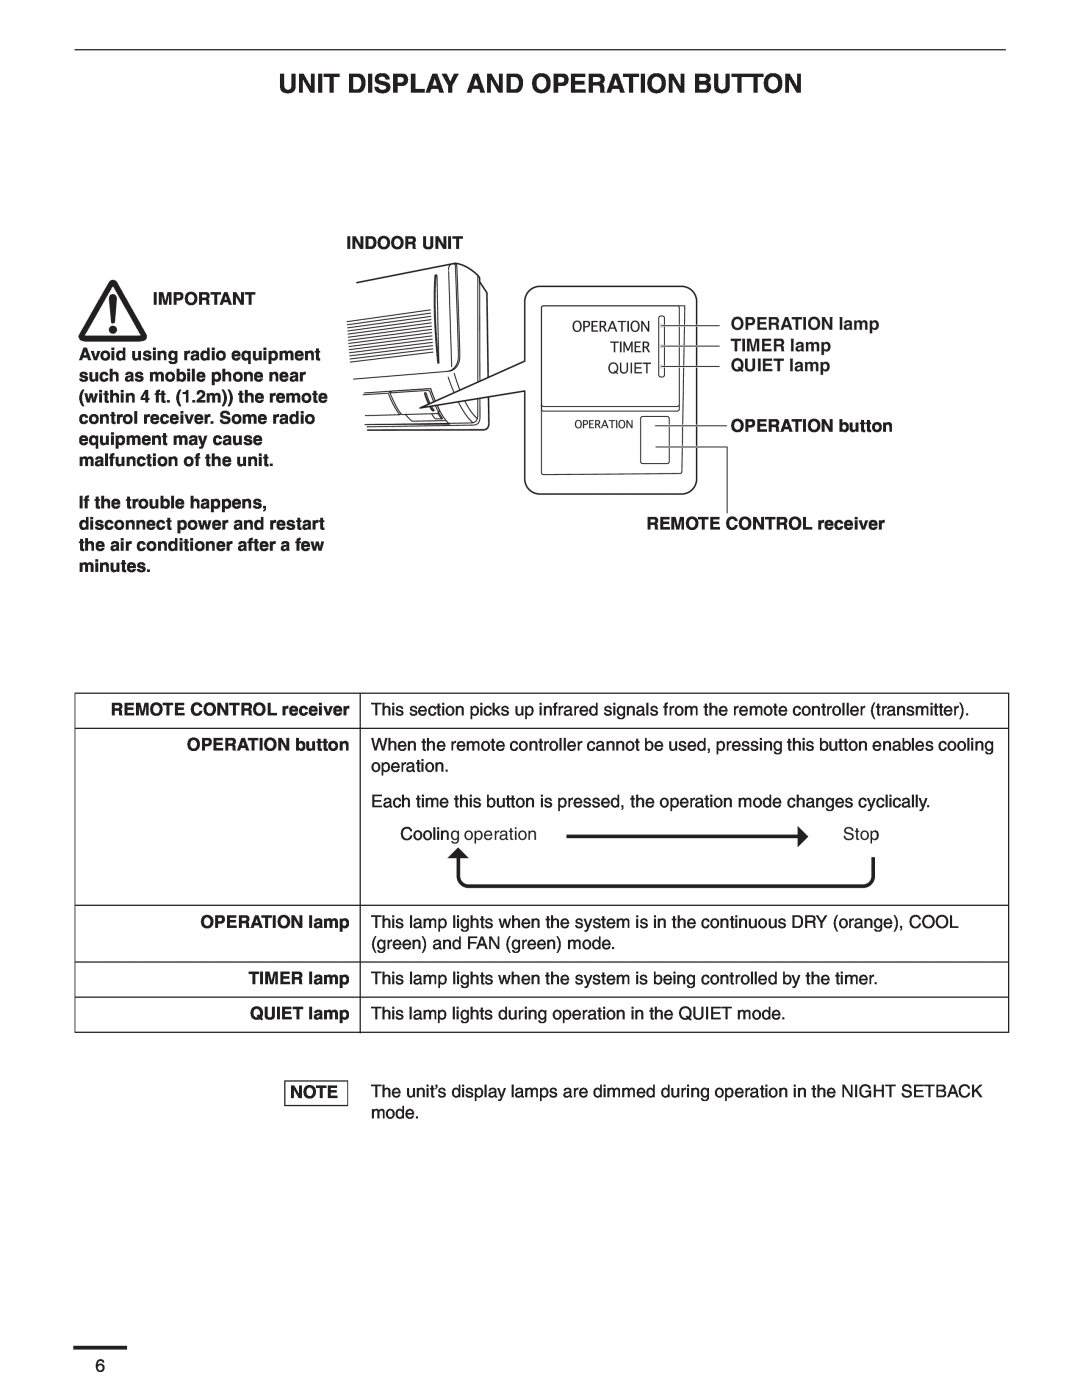 Panasonic CS-MKS18NKU, CS-MKS24NKU, CS-MKS9NKU service manual Unit Display And Operation Button 